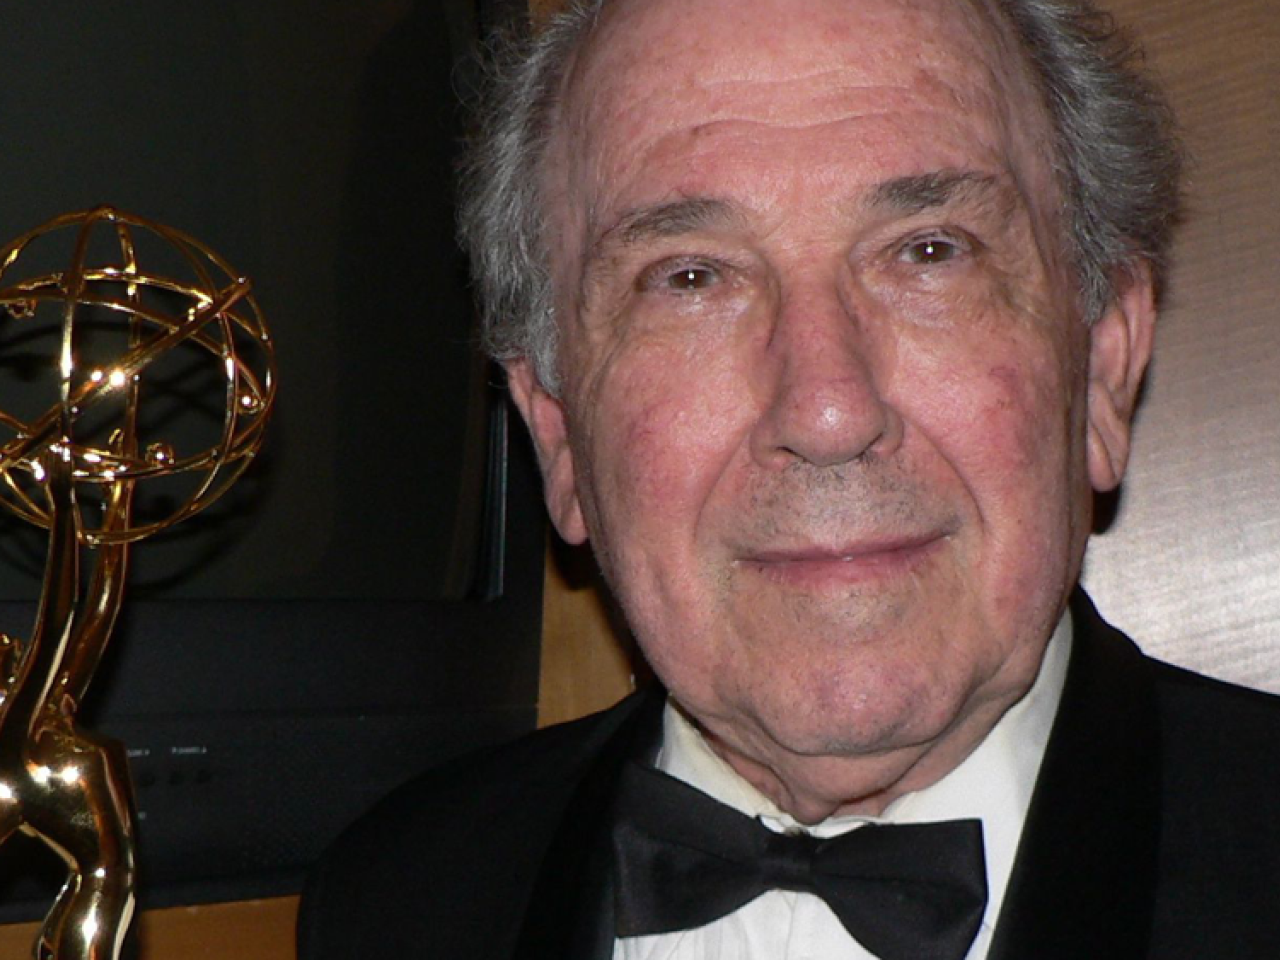 Filmmaker Robert Richter looks at the camera with a slight smile. He is dressed in a black tux. A gold Emmy statue is to his left.